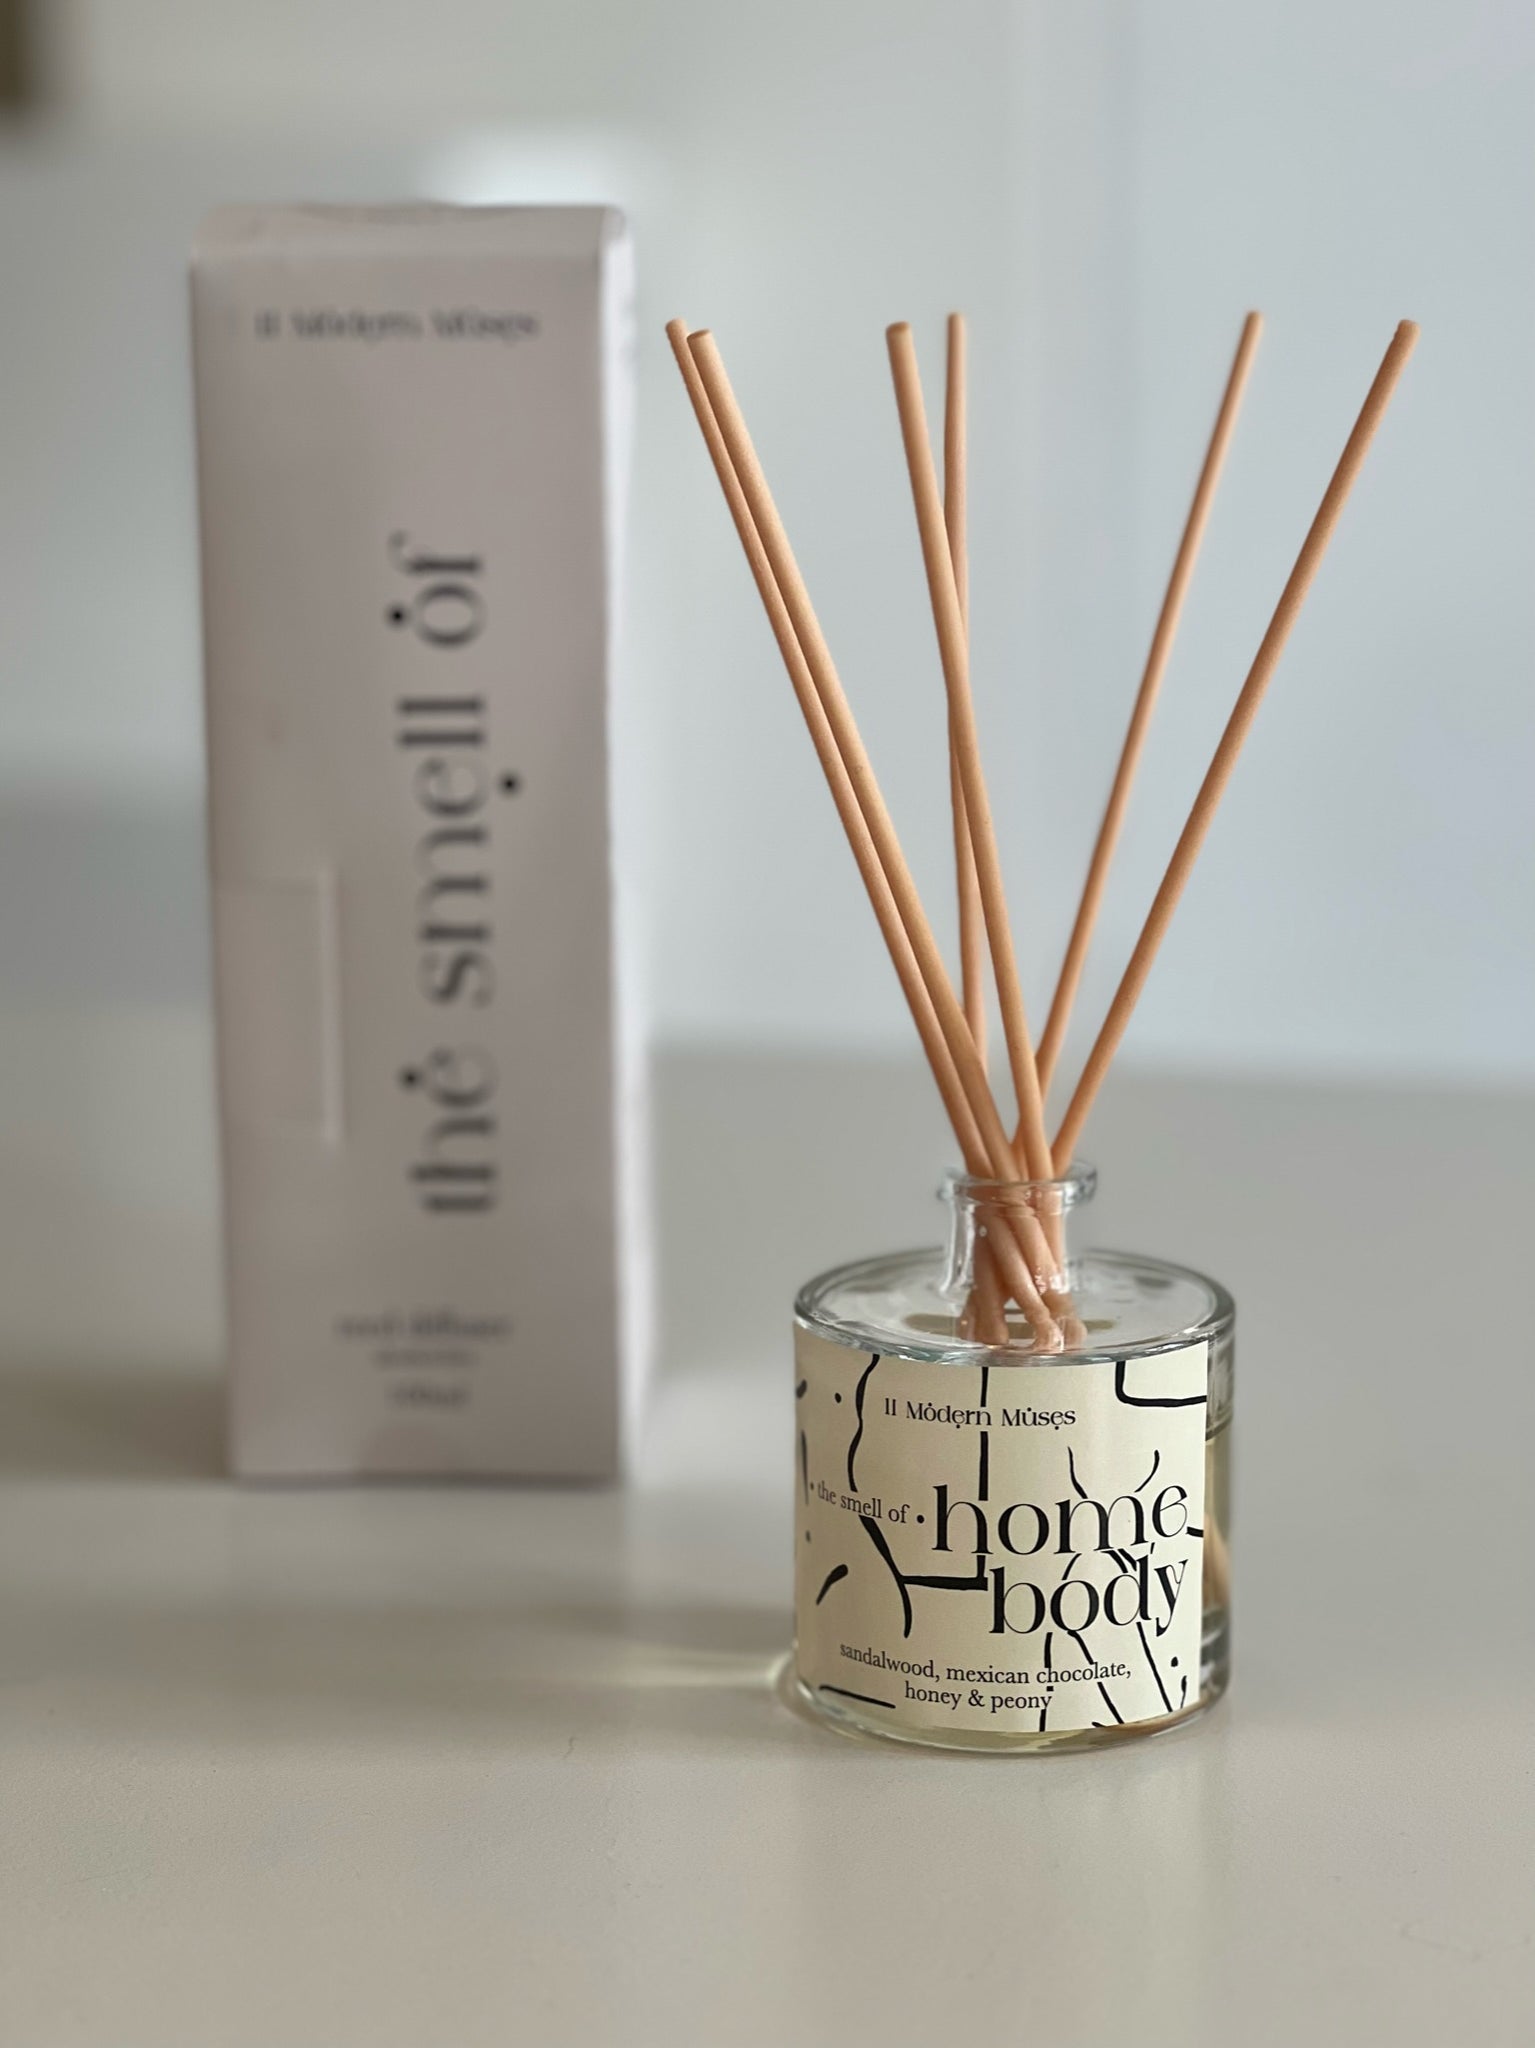 THE SMELL OF HOMEBODY - MILKY TONES OF SANDALWOOD, MEXICAN CHOCOLATE, HONEY & PEONY